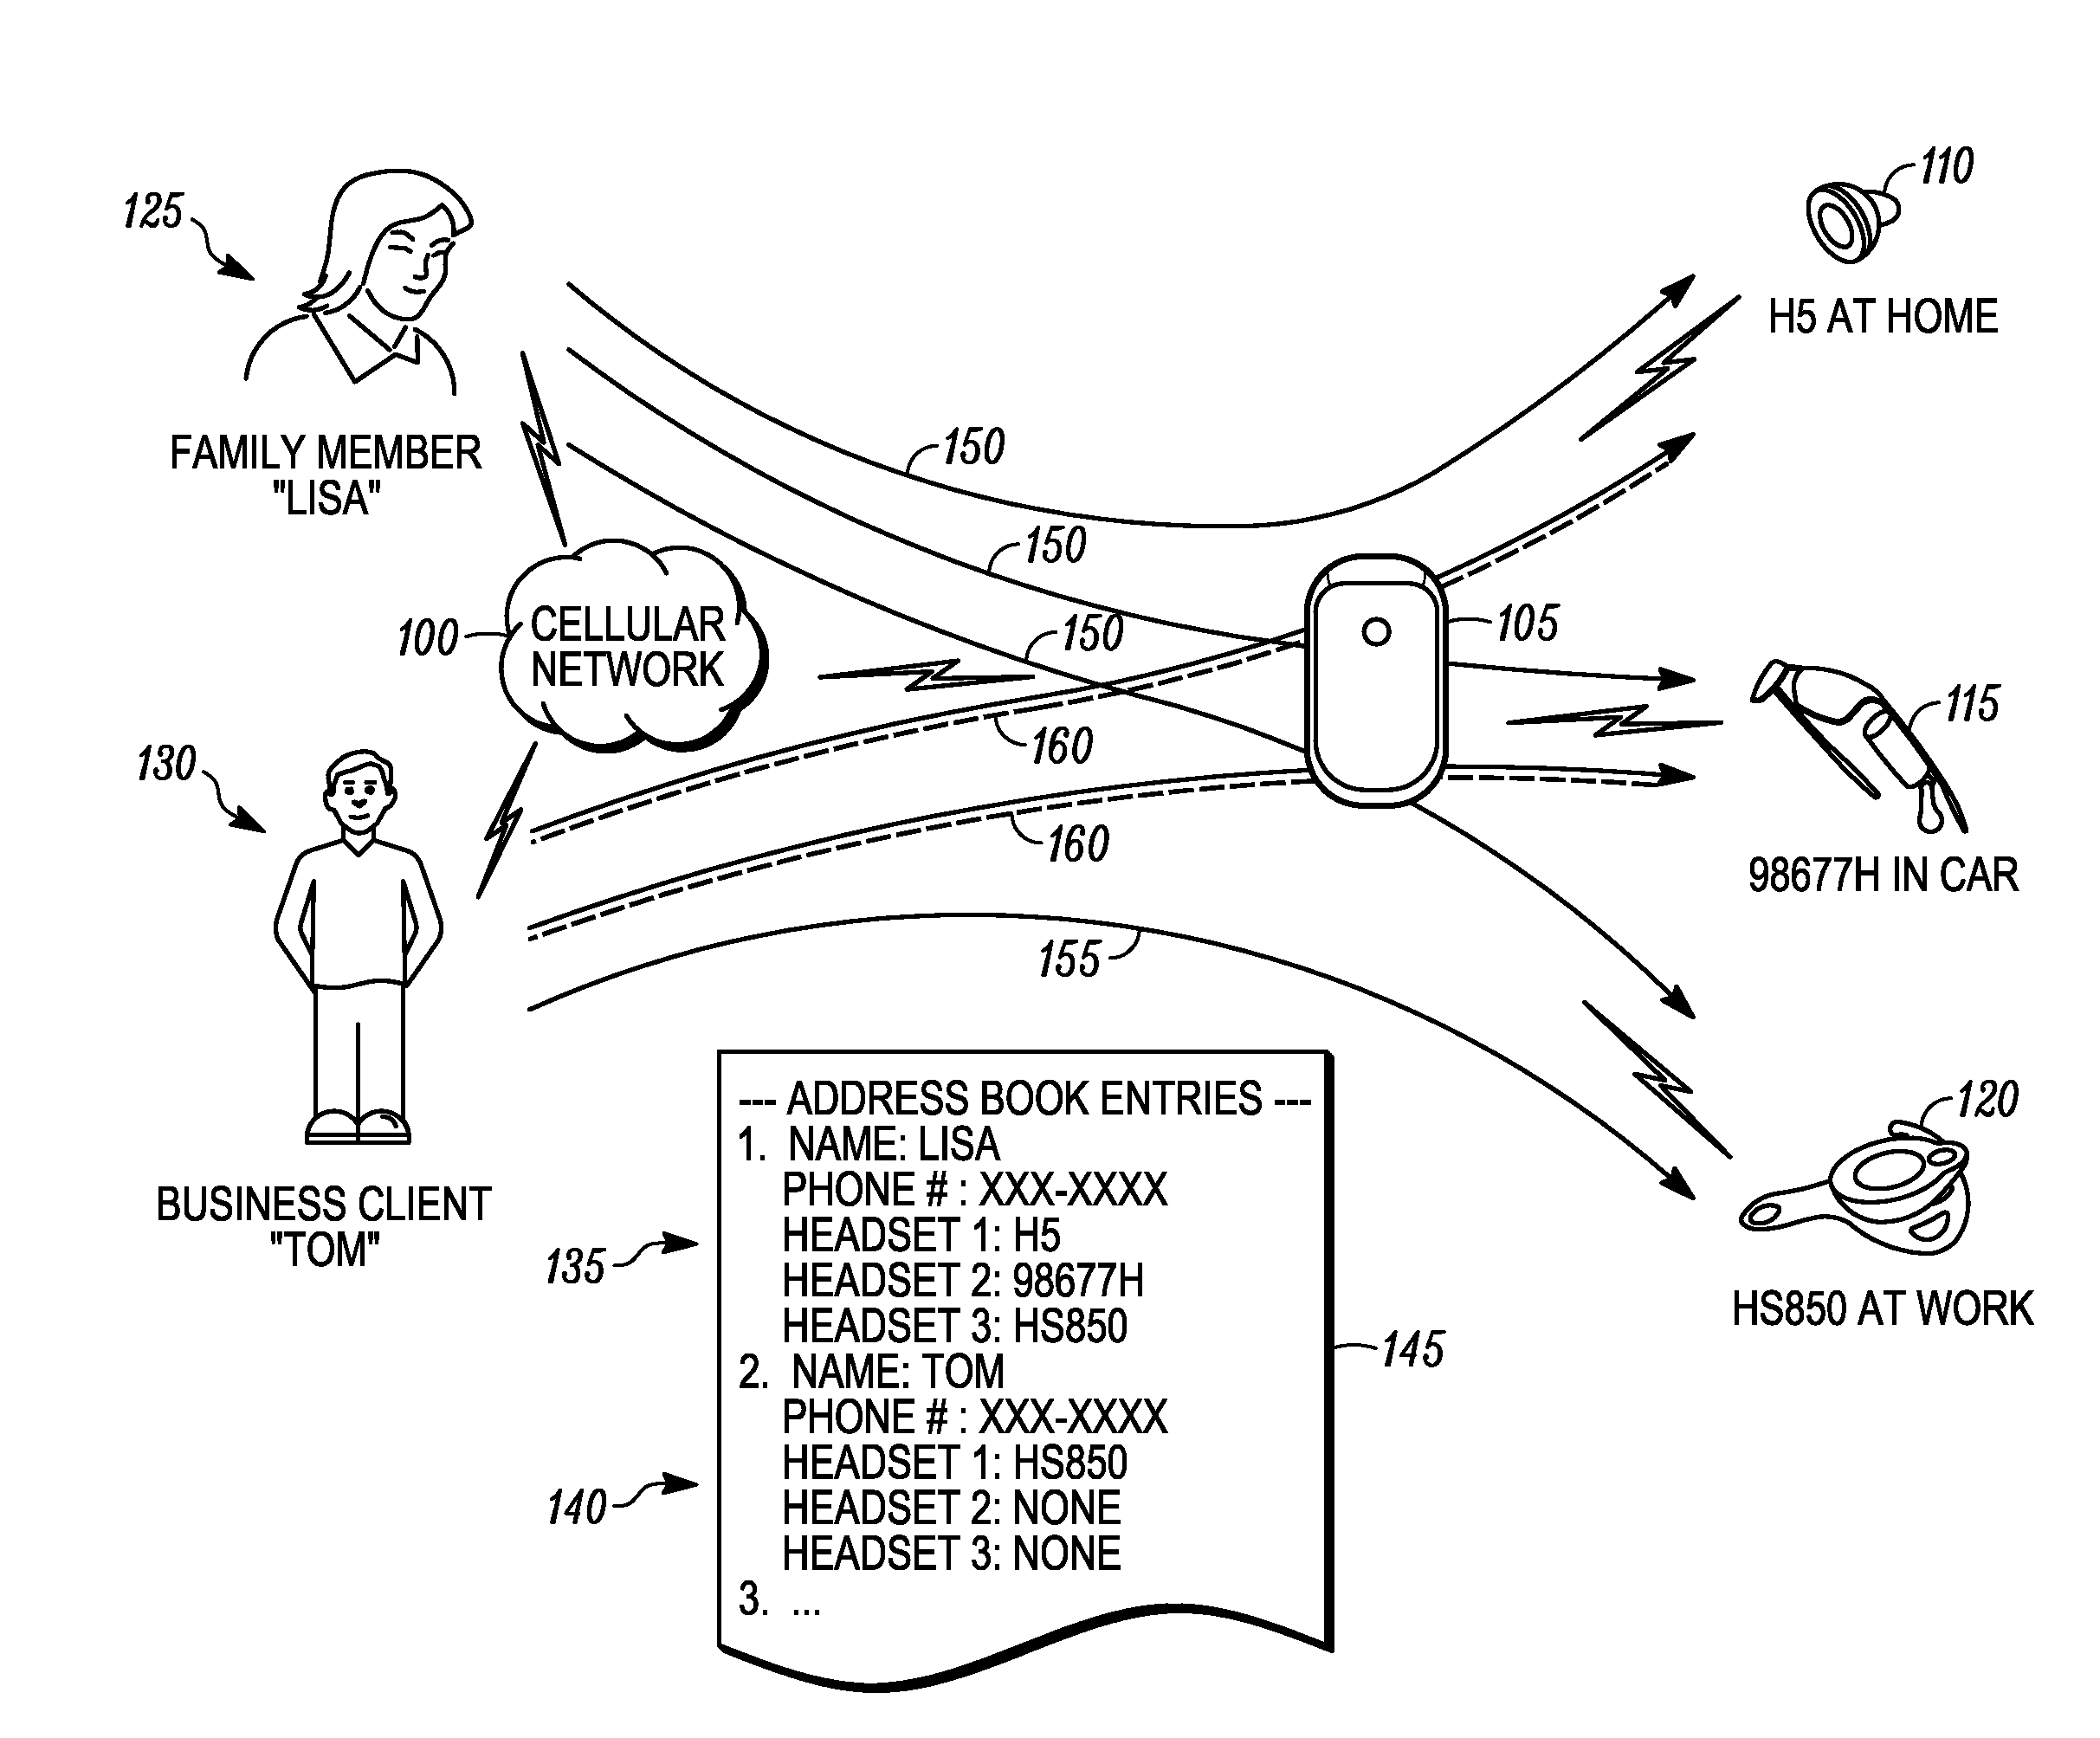 Method and system for processing an incoming call